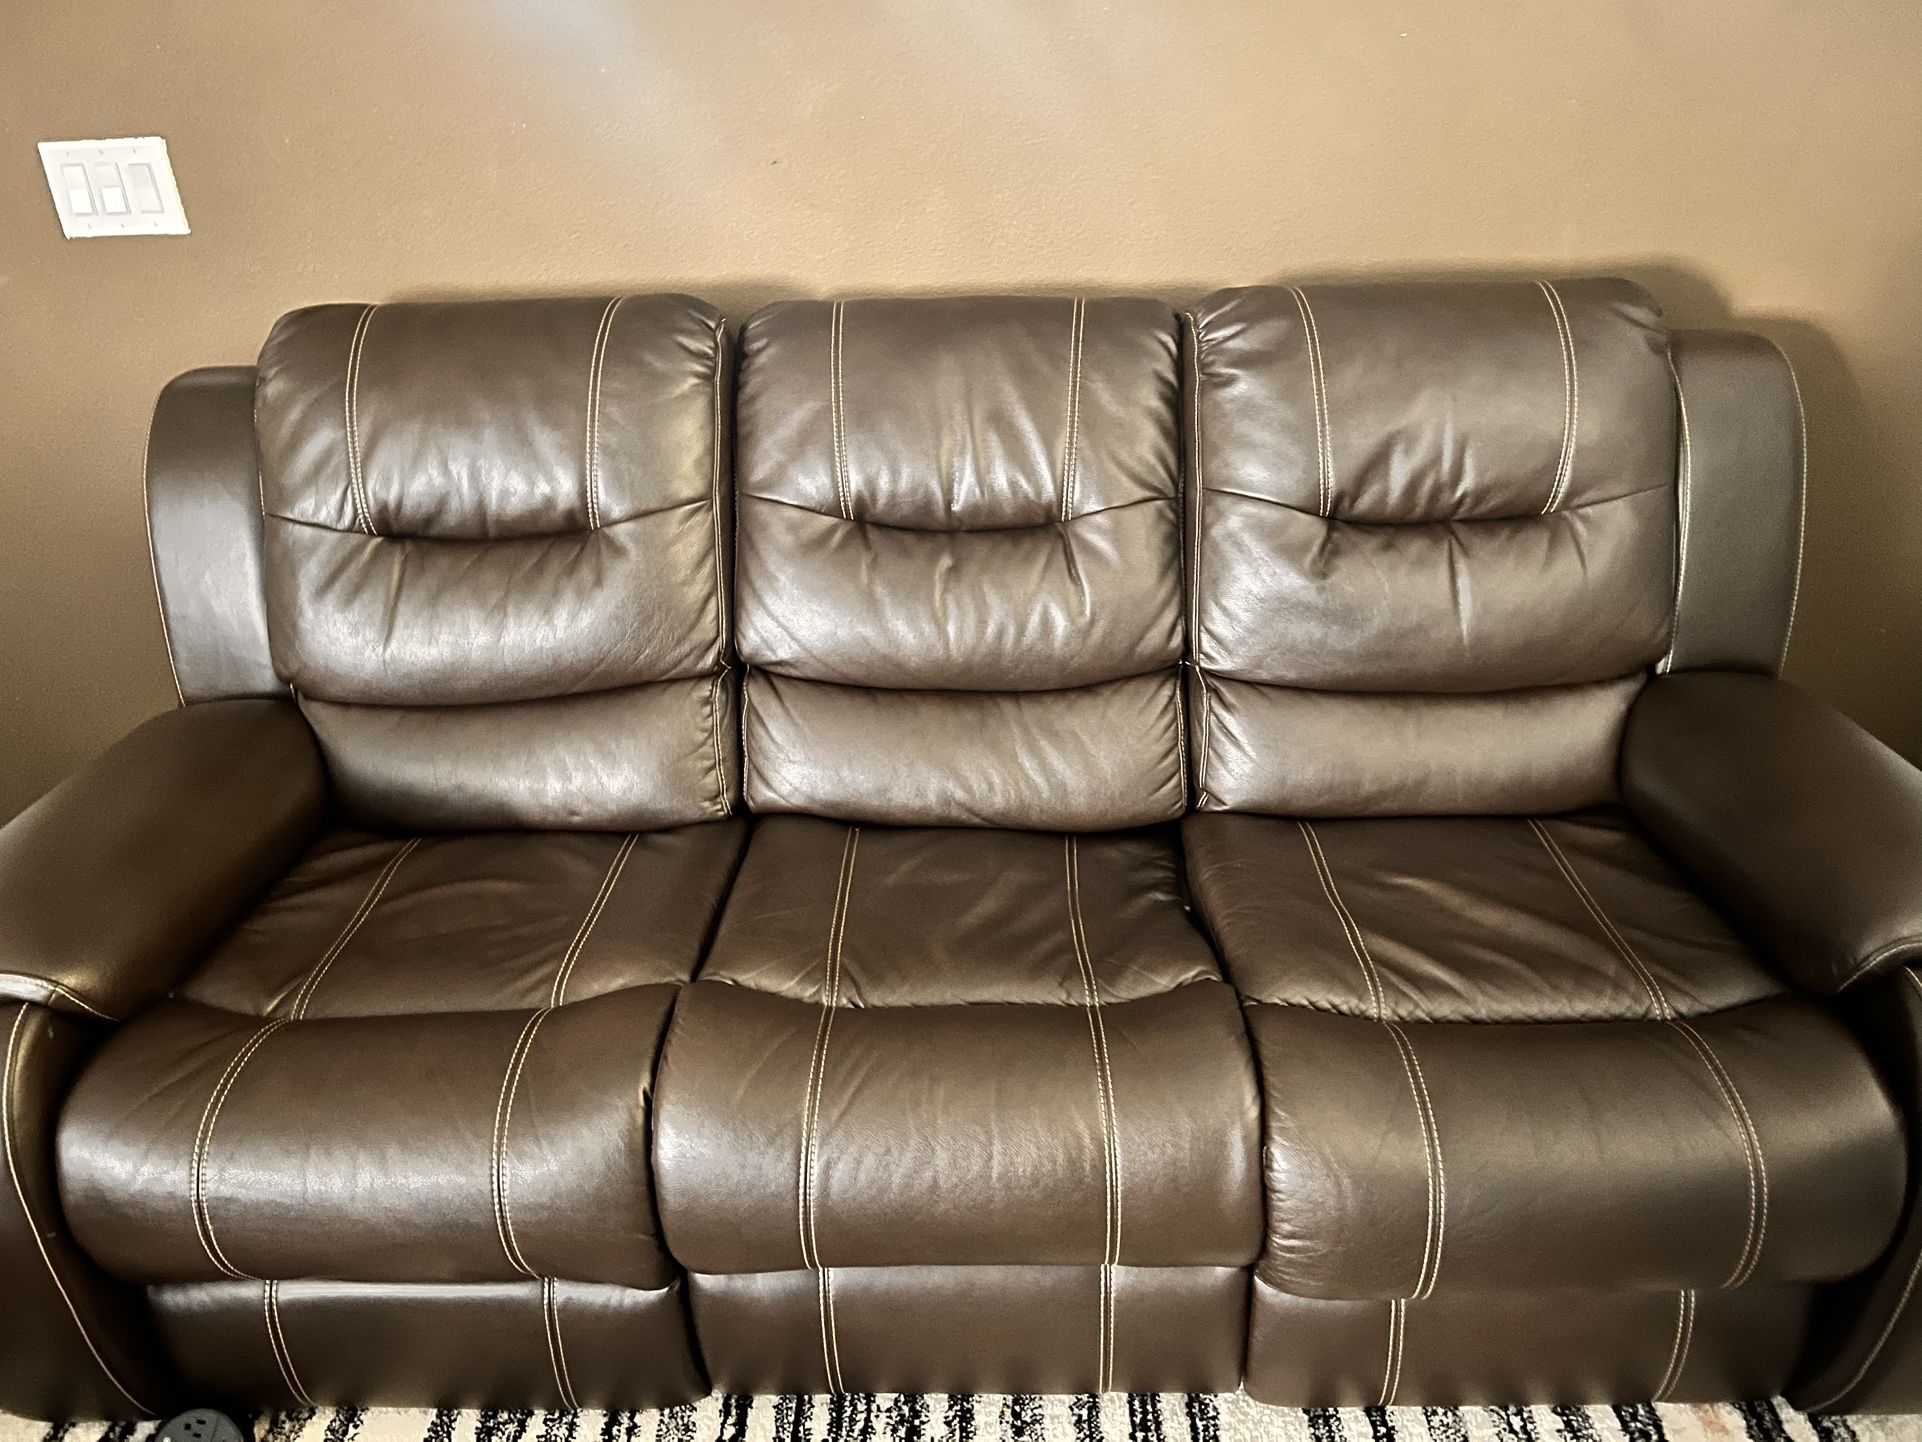 Leather Recliner Couches $400